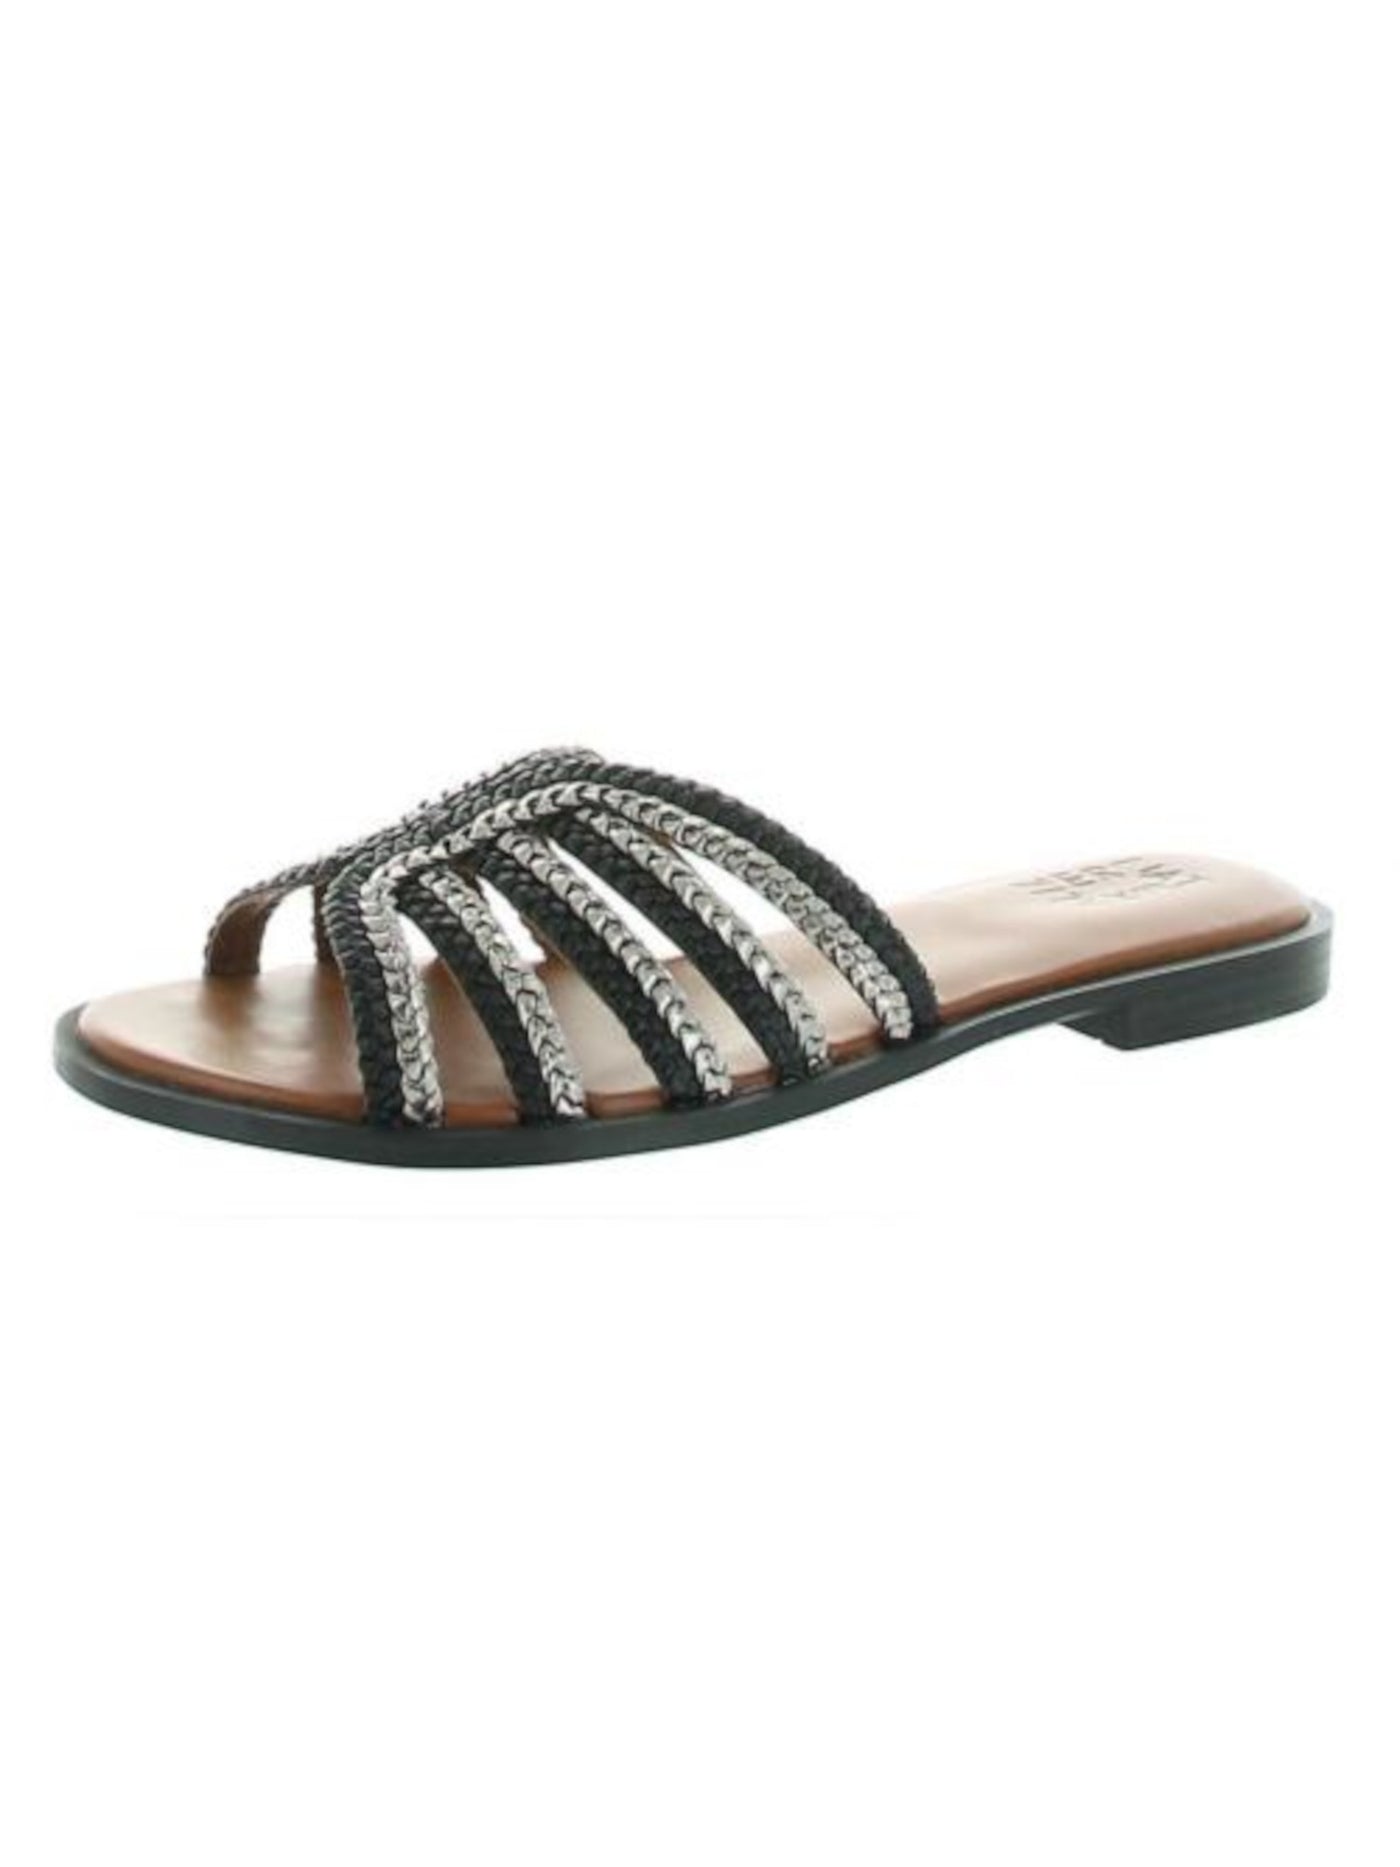 NATURALIZER Womens Black Multi Striped Flexible Sole Cushioned Lightweight Lane Round Toe Slip On Leather Slide Sandals Shoes 9.5 M